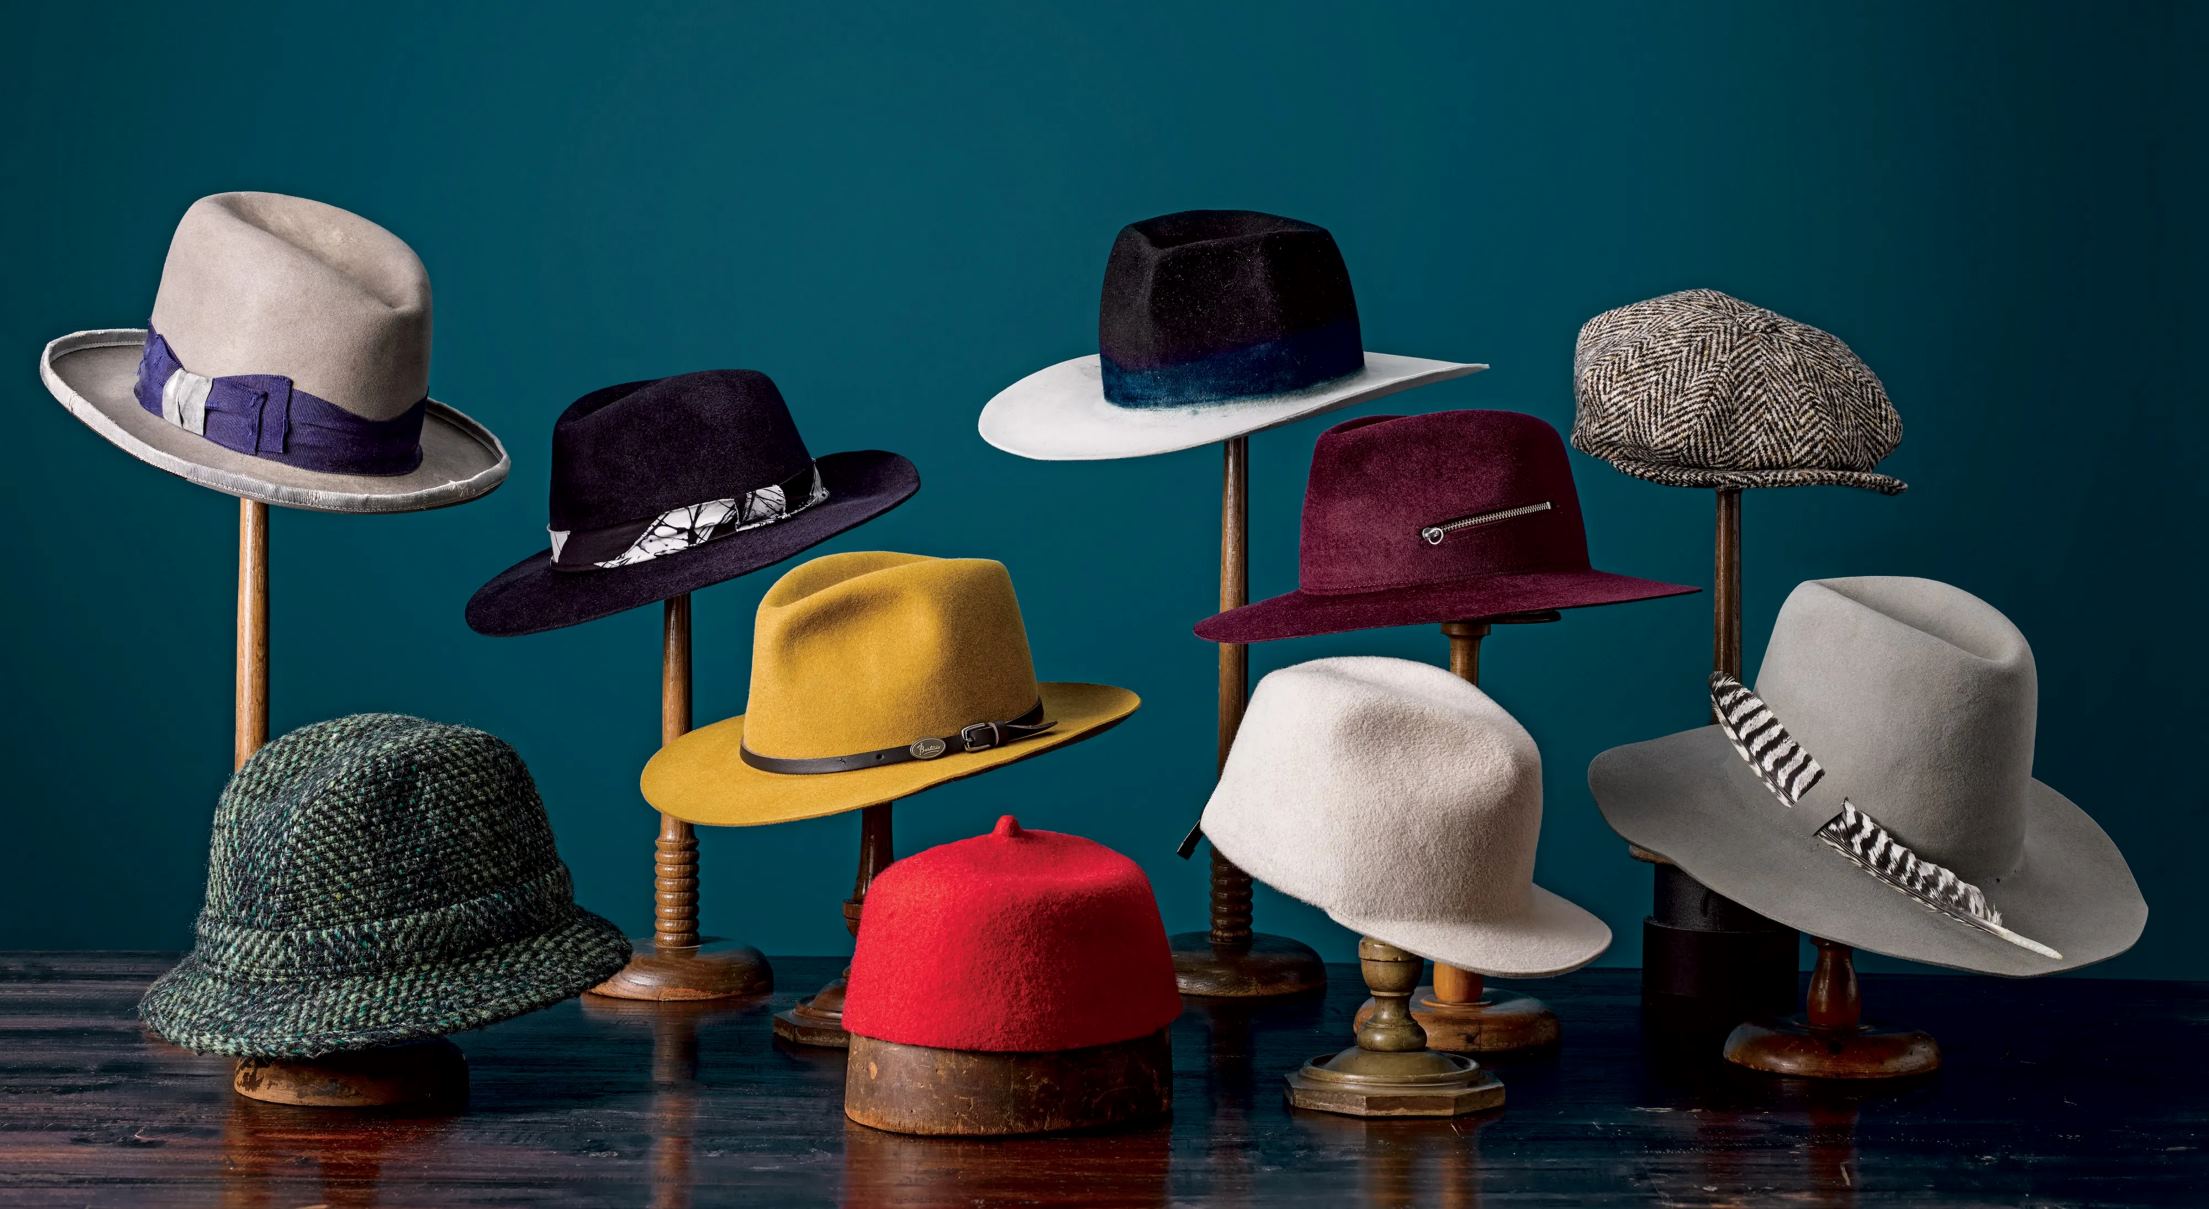 11 Facts About Hats - Facts.net